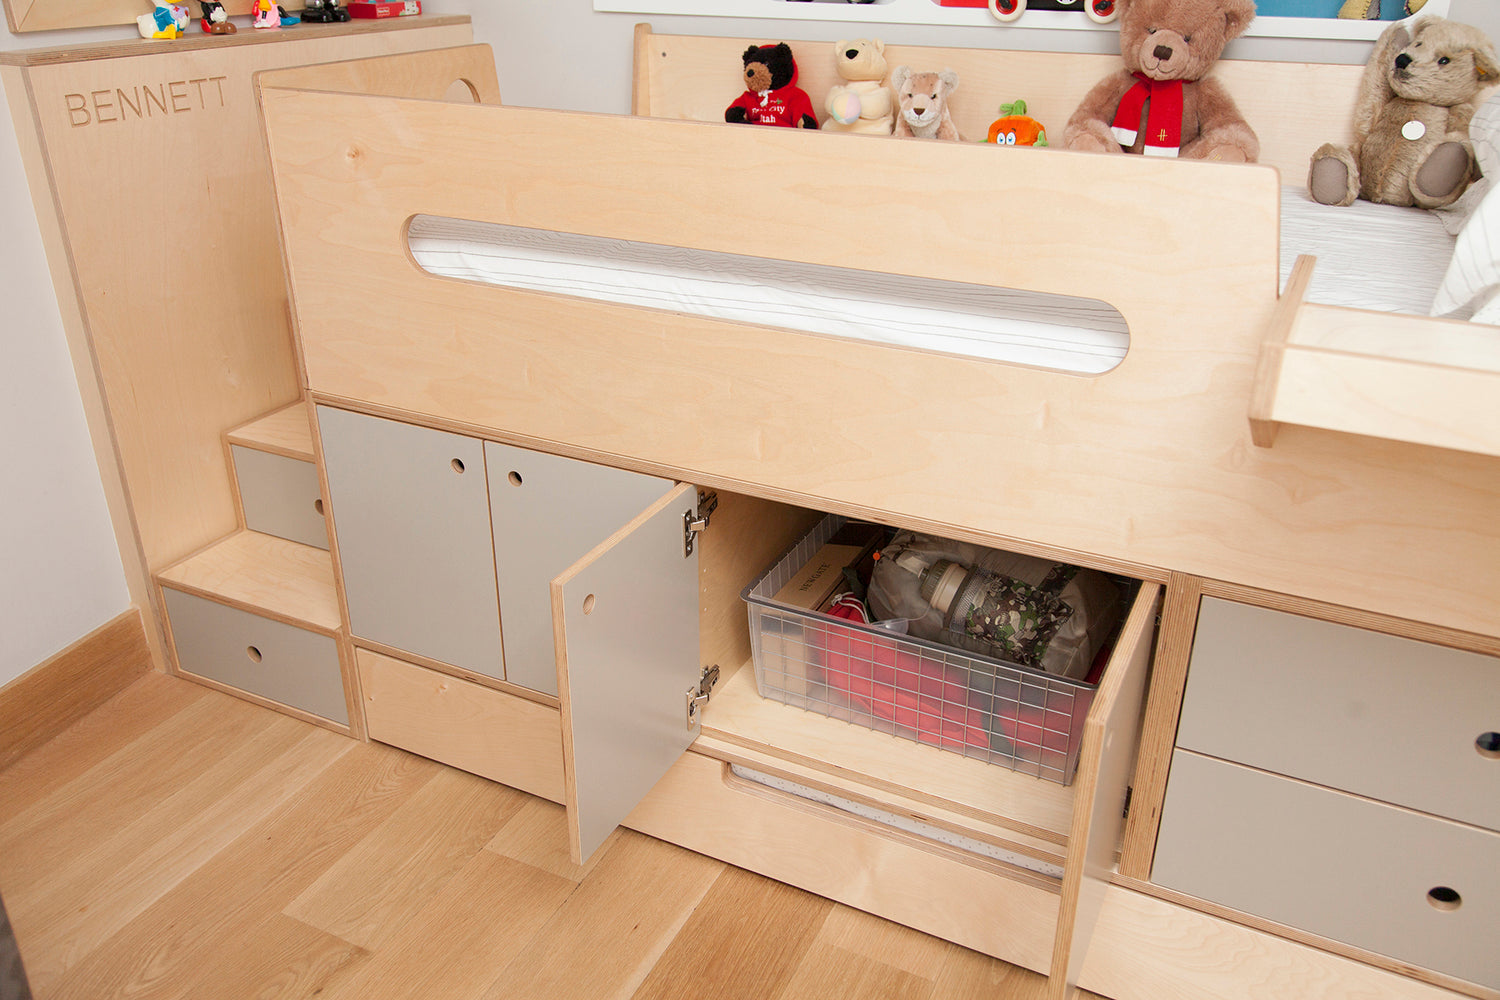 Child’s bed with storage, toys, and an open drawer showing contents.